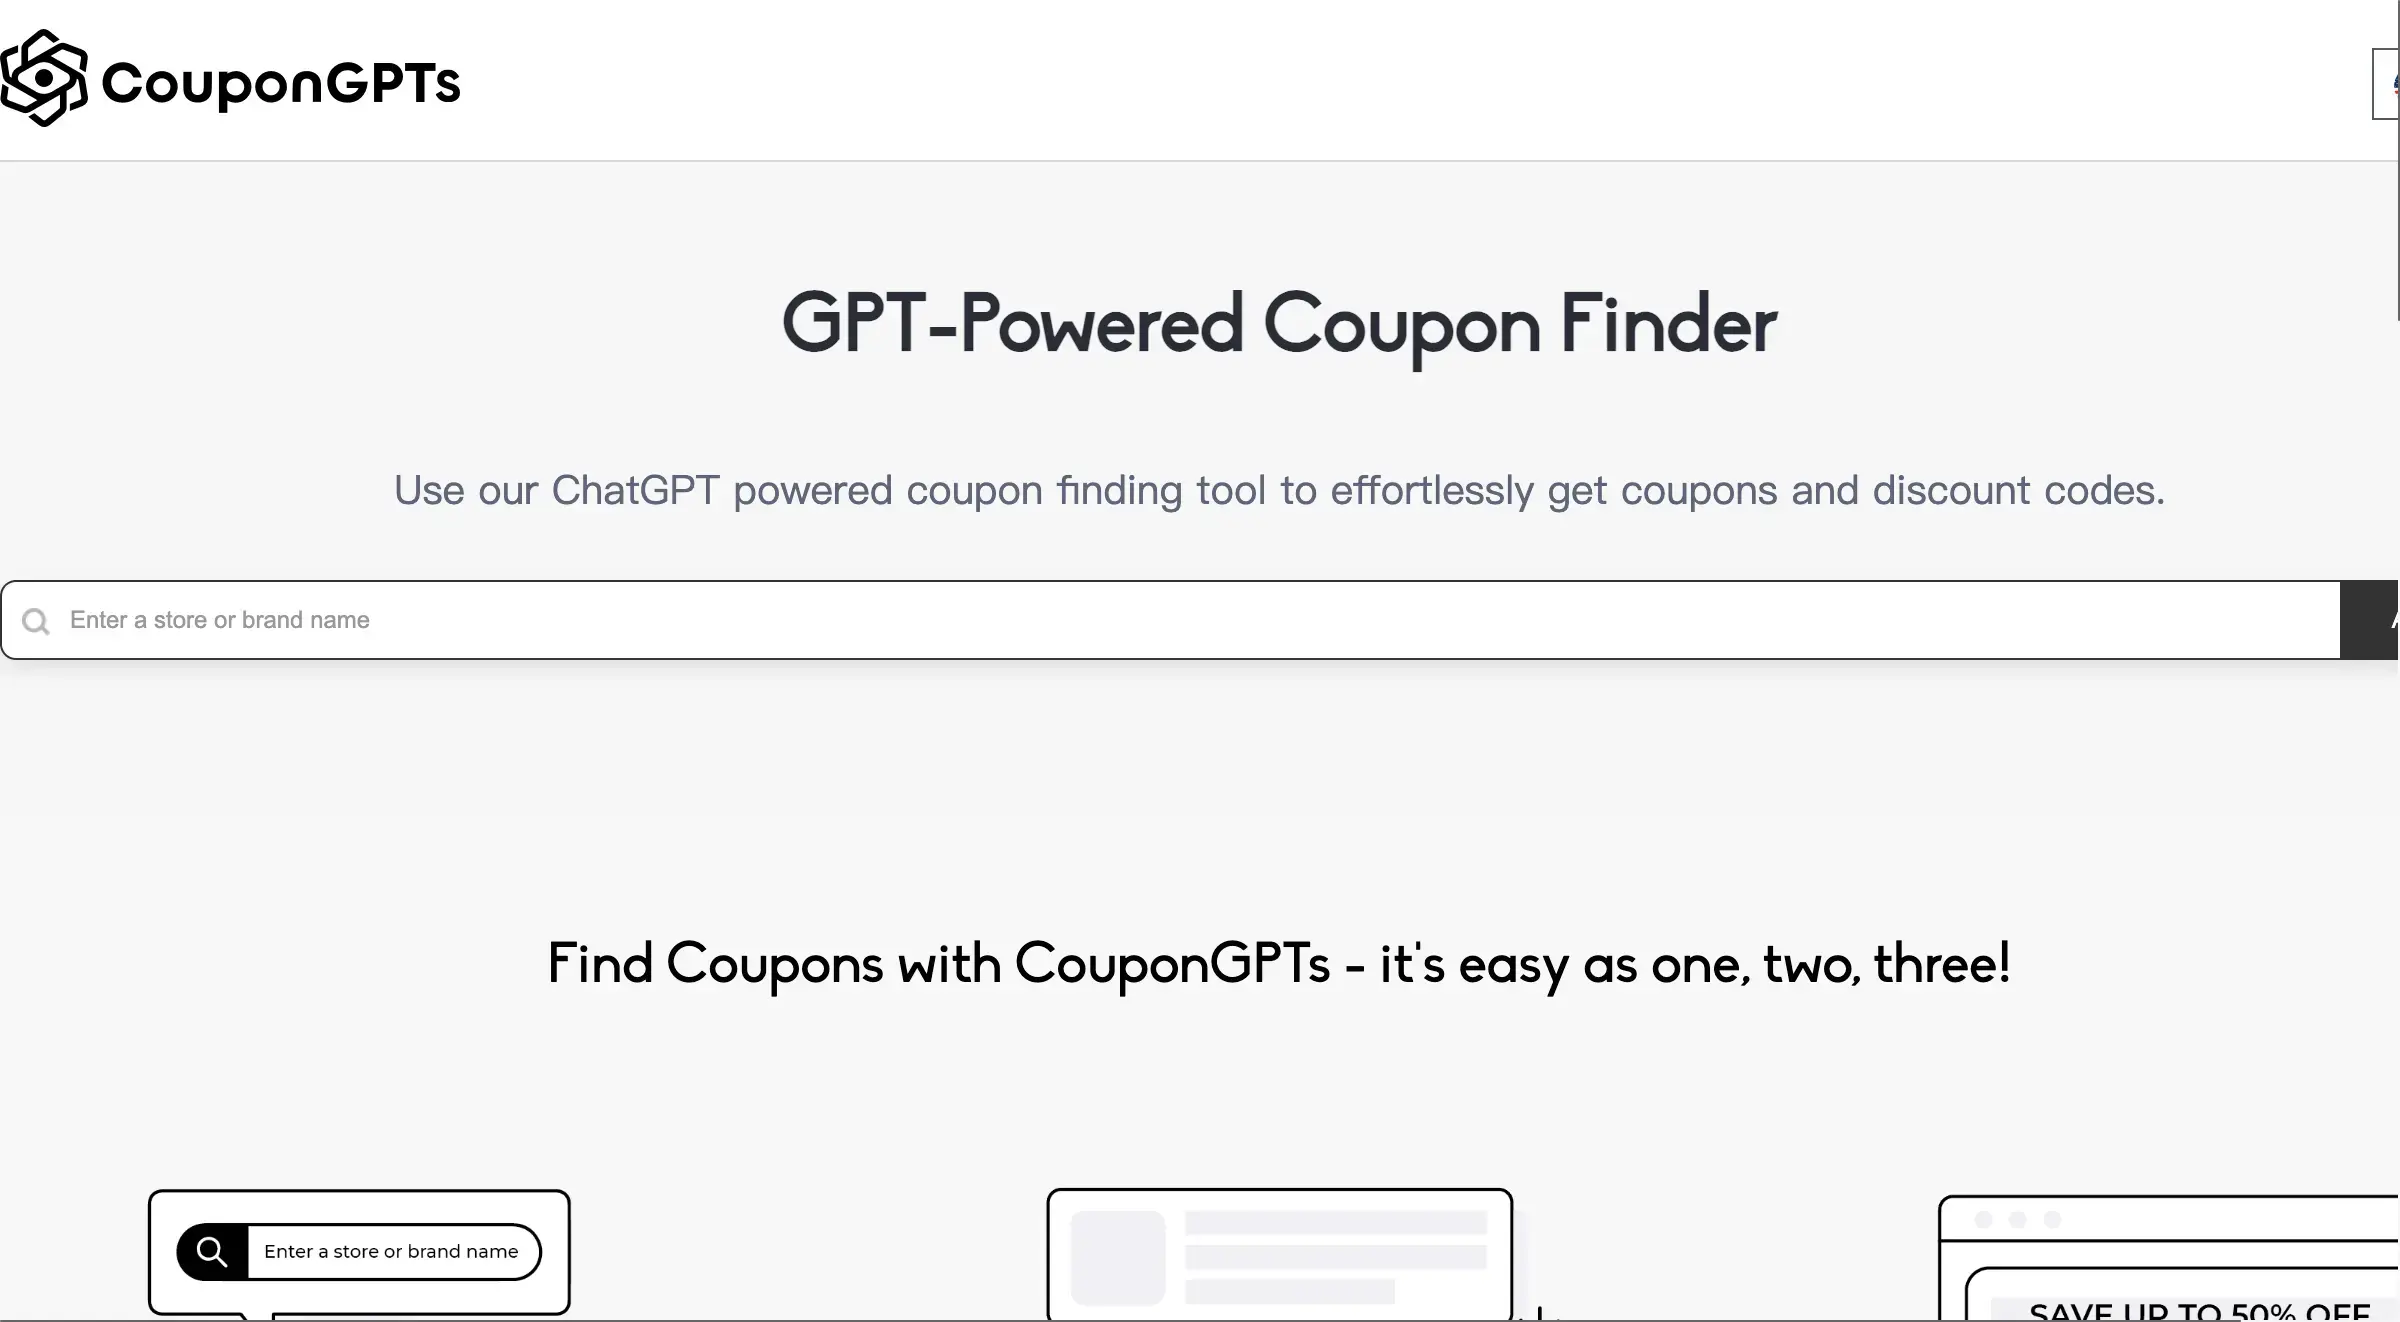 Revolutionize Your Savings with AI Coupon Finder Powered by ChatGPT